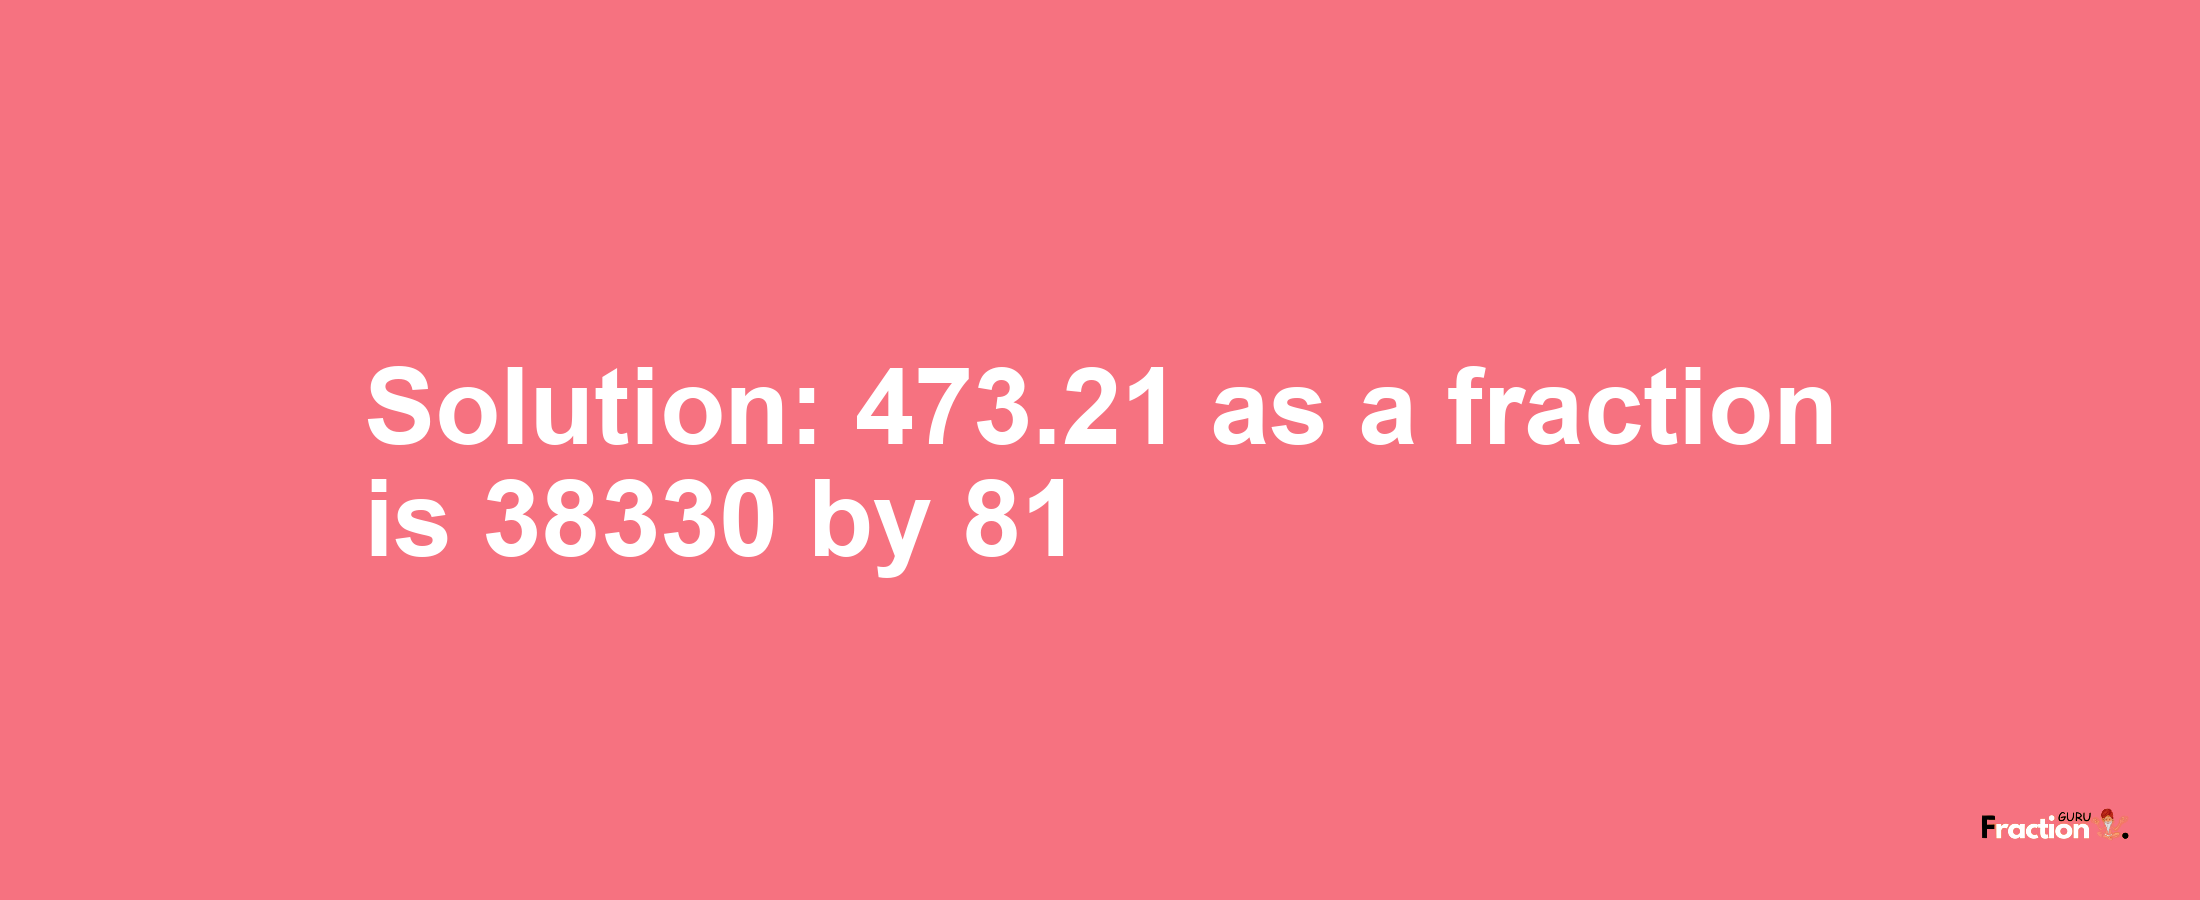 Solution:473.21 as a fraction is 38330/81